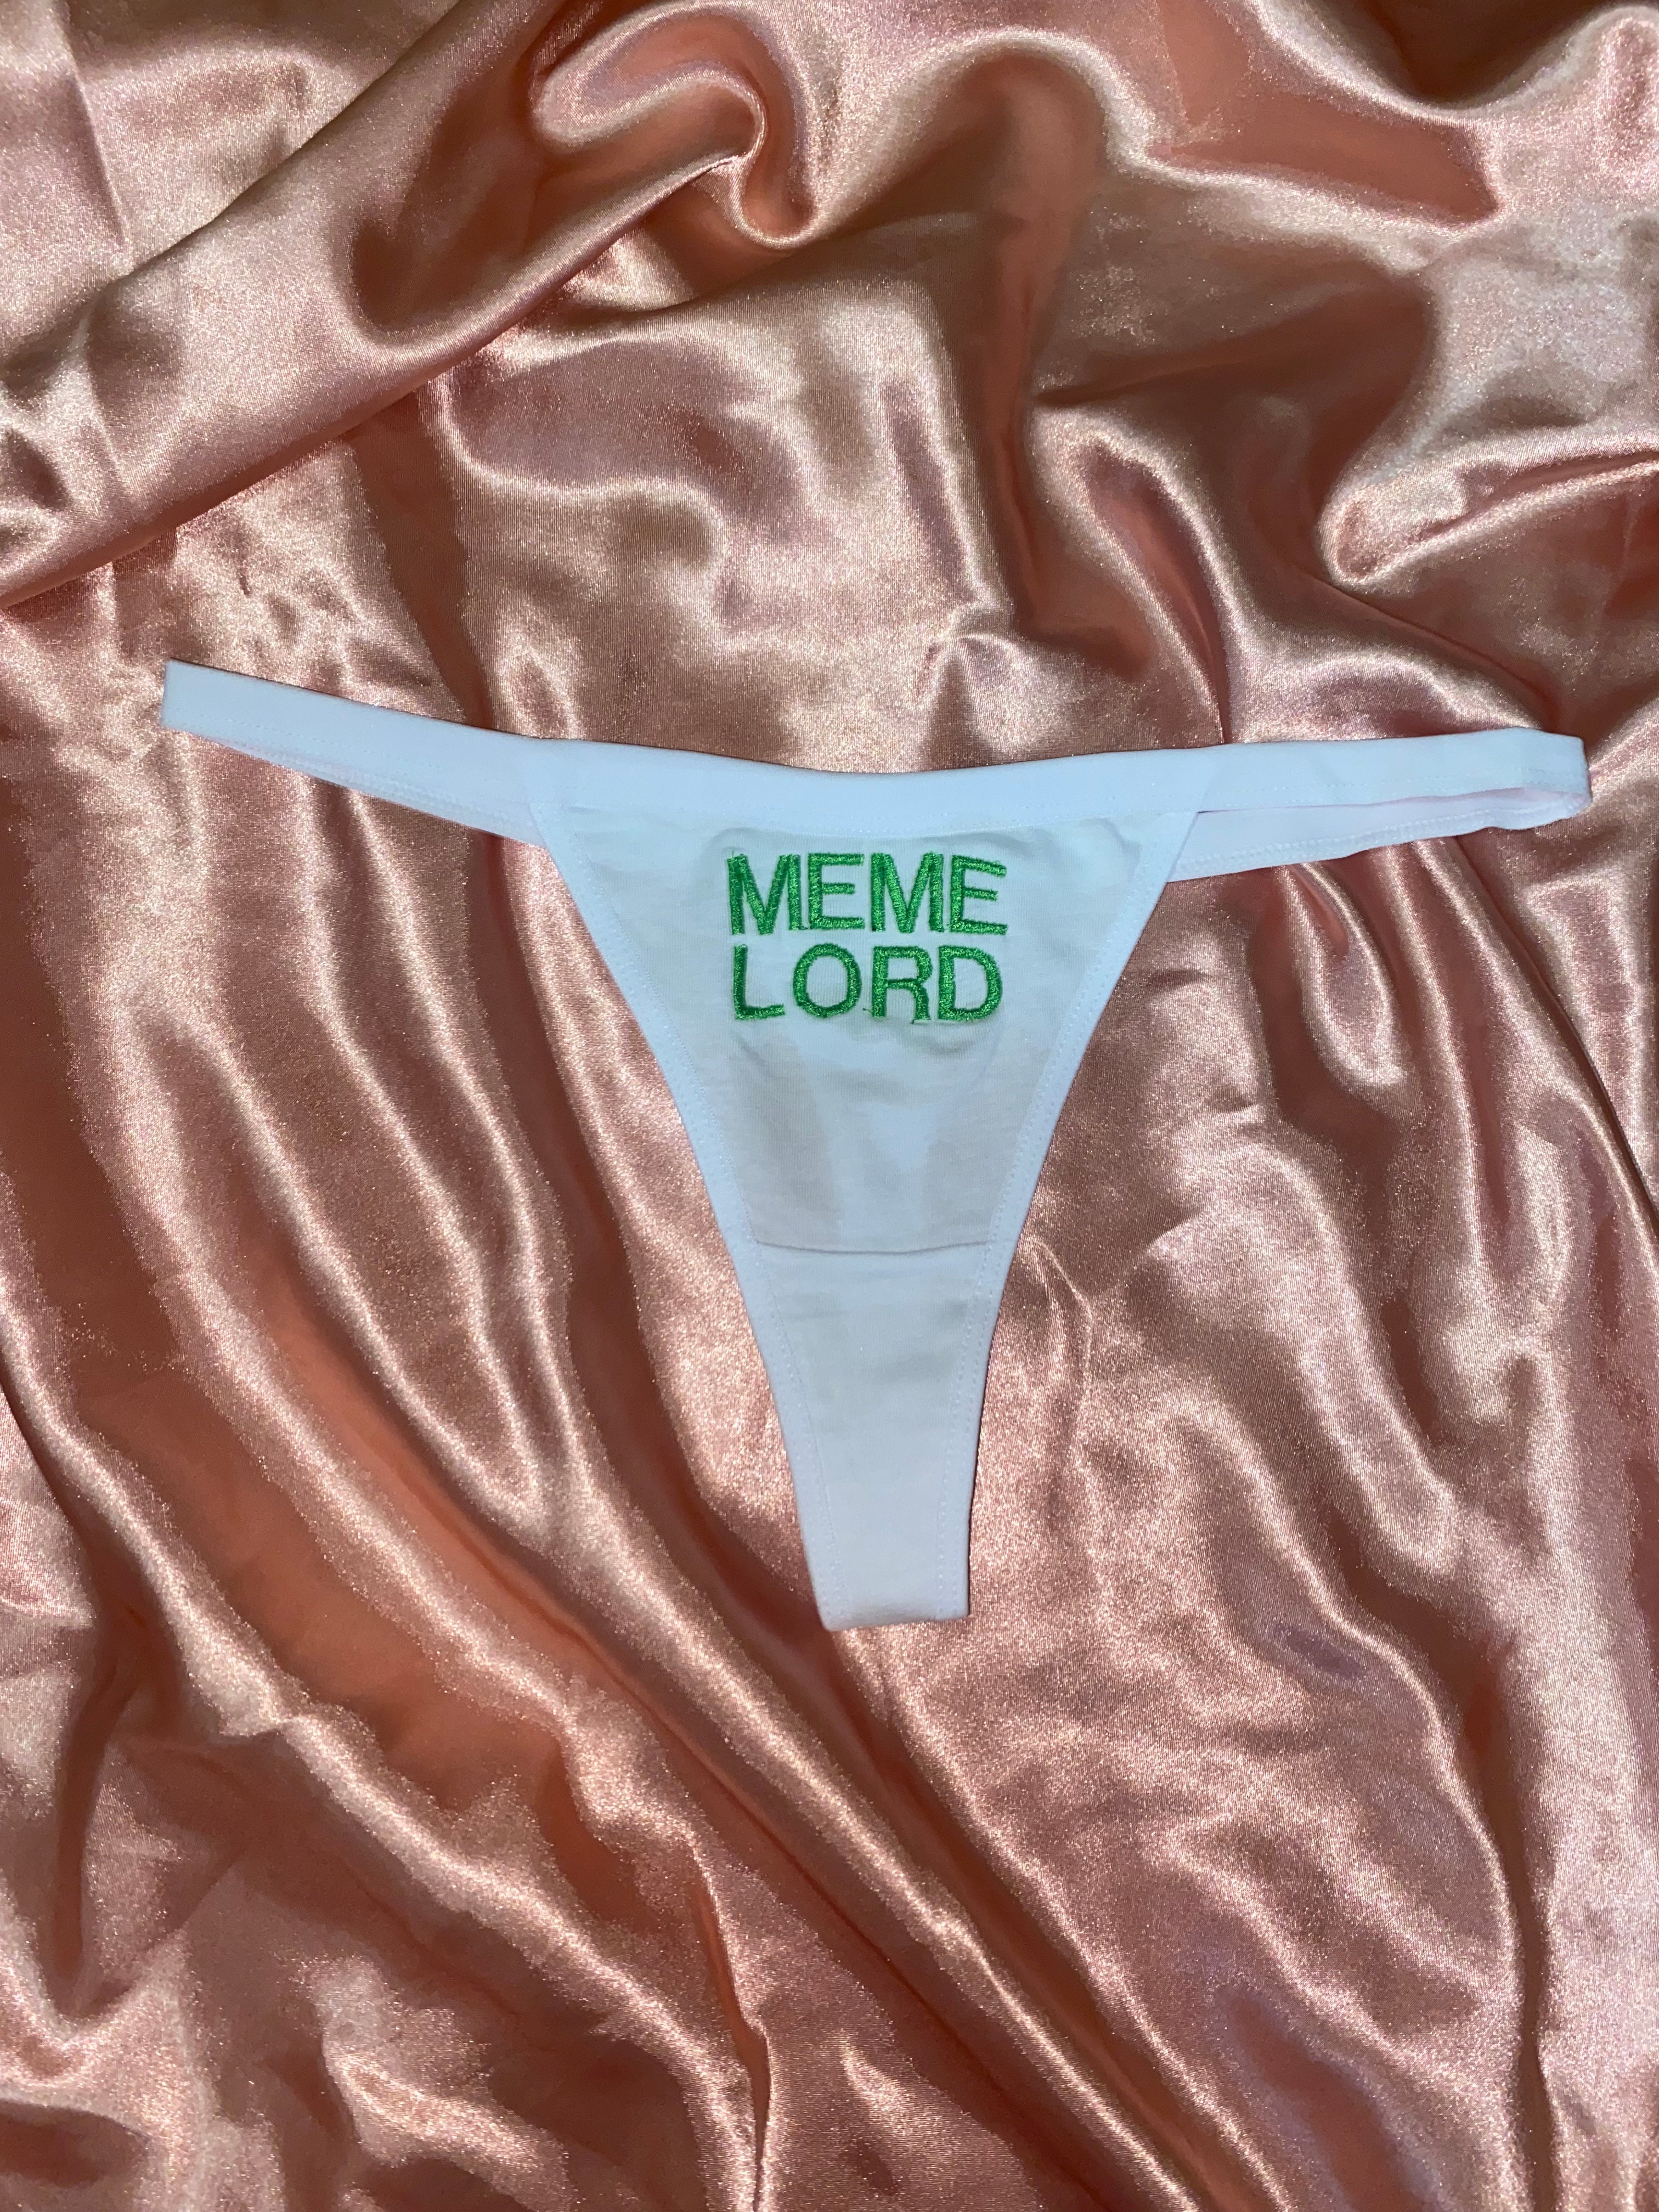 denzil franklin recommends lord of the thong pic